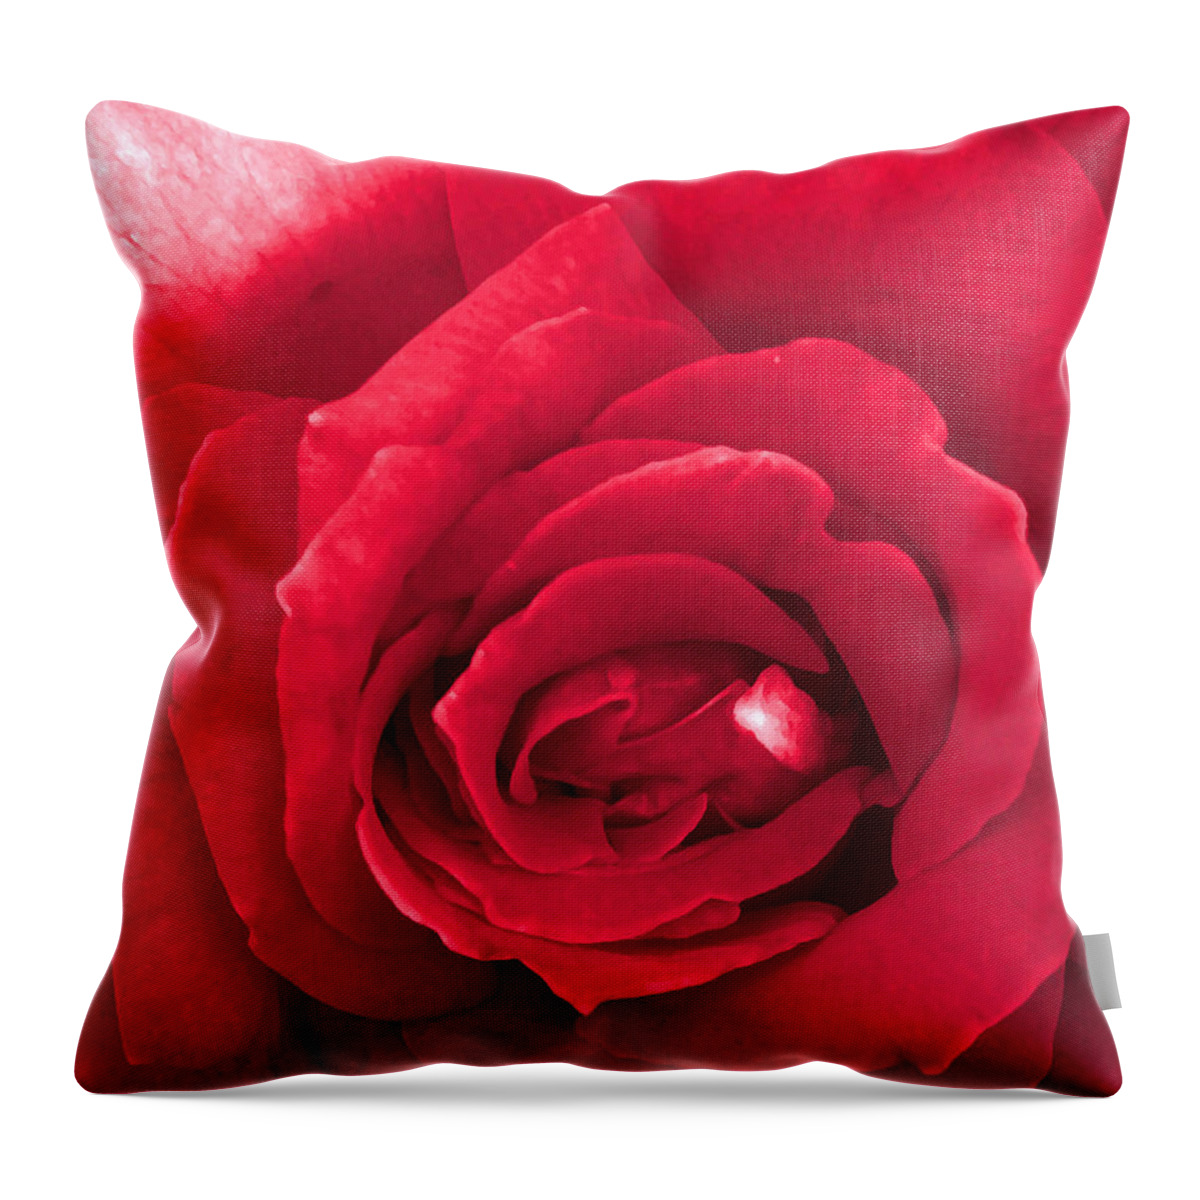 Red Throw Pillow featuring the photograph Red Velvet Rose by Denise Beverly